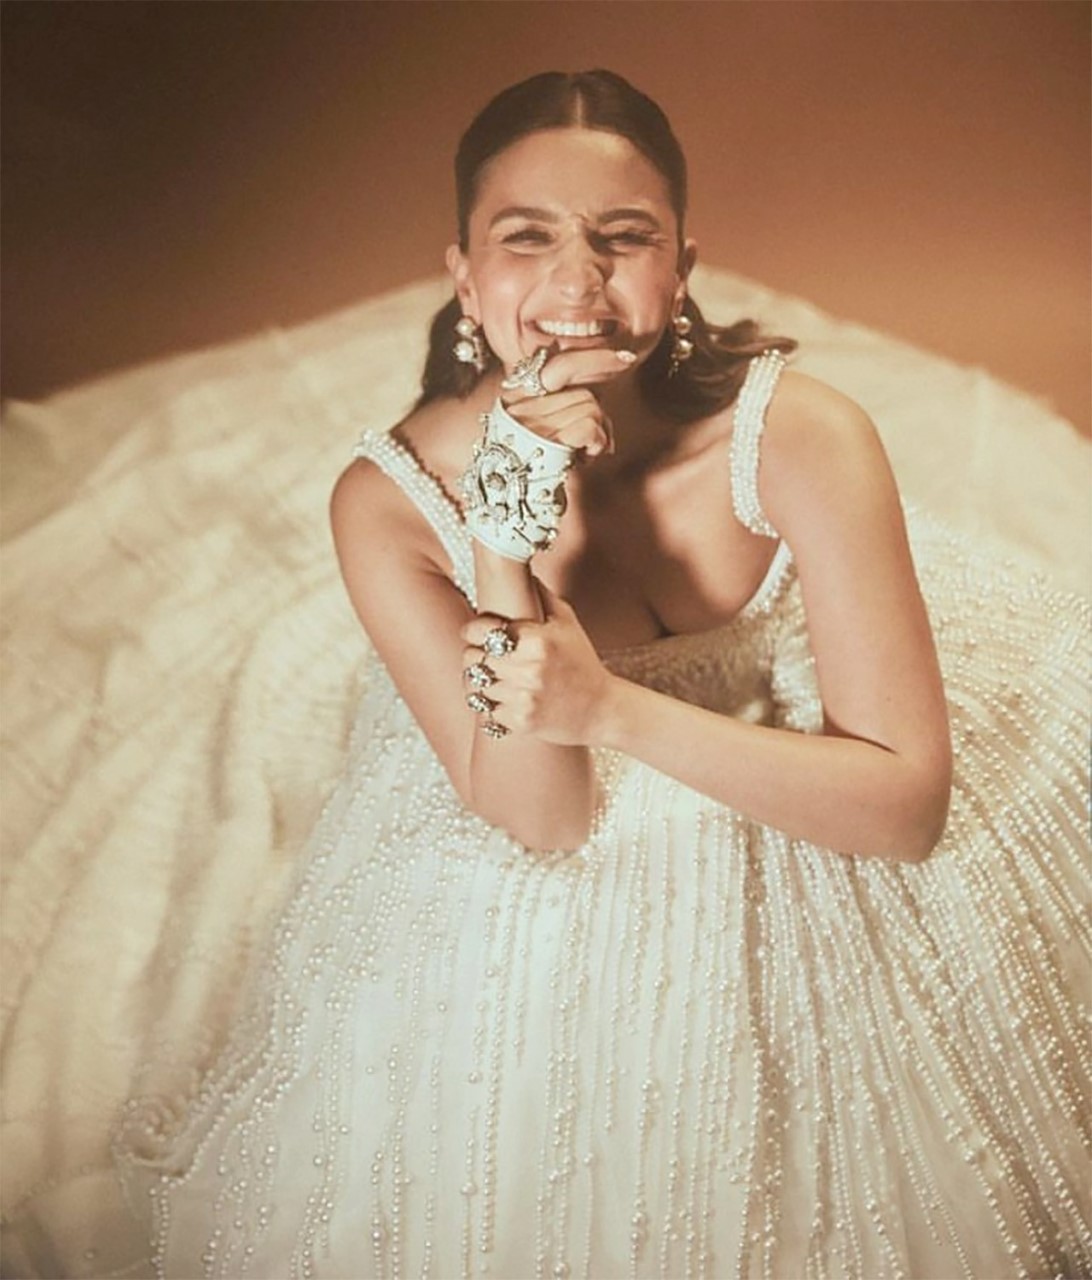 Vogue Magazine takes us behind the scenes of Alia Bhatt's Met Gala look, dripping in pearls and all things glamour